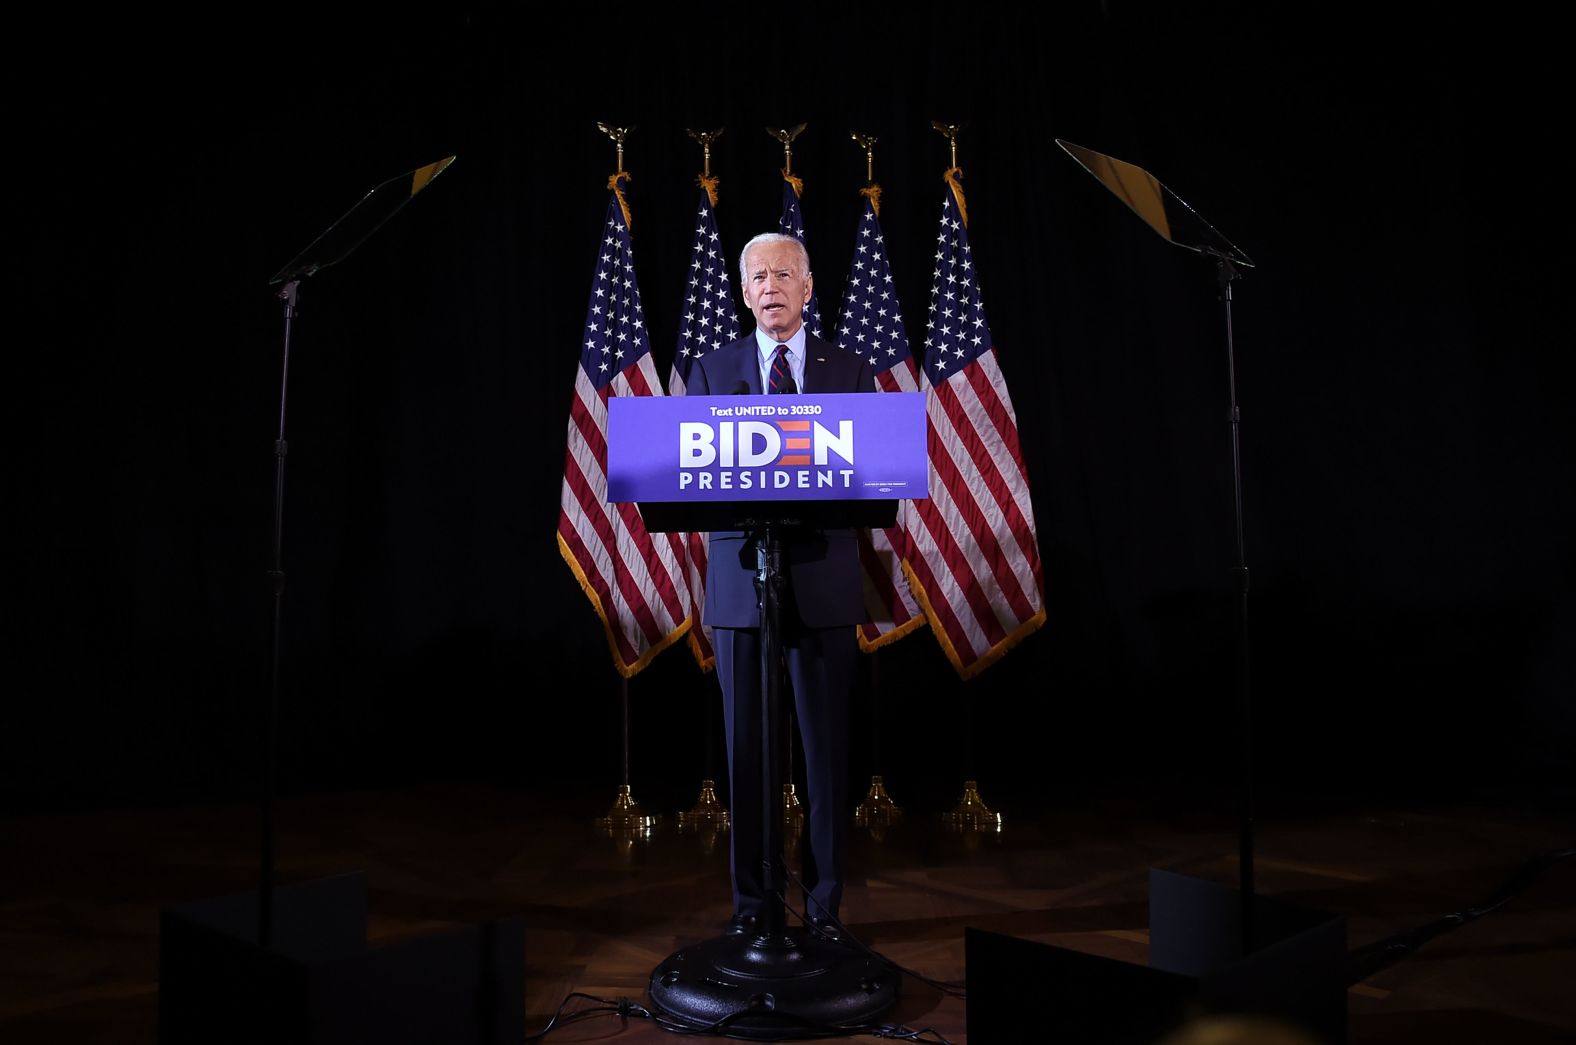 Former Vice President Joe Biden makes a statement to the press in Wilmington, Delaware, on September 24. <a href="https://www.cnn.com/2019/09/24/politics/joe-biden-trump-congress-impeach/index.html" target="_blank">He urged Trump to cooperate with lawmakers</a> or face impeachment.